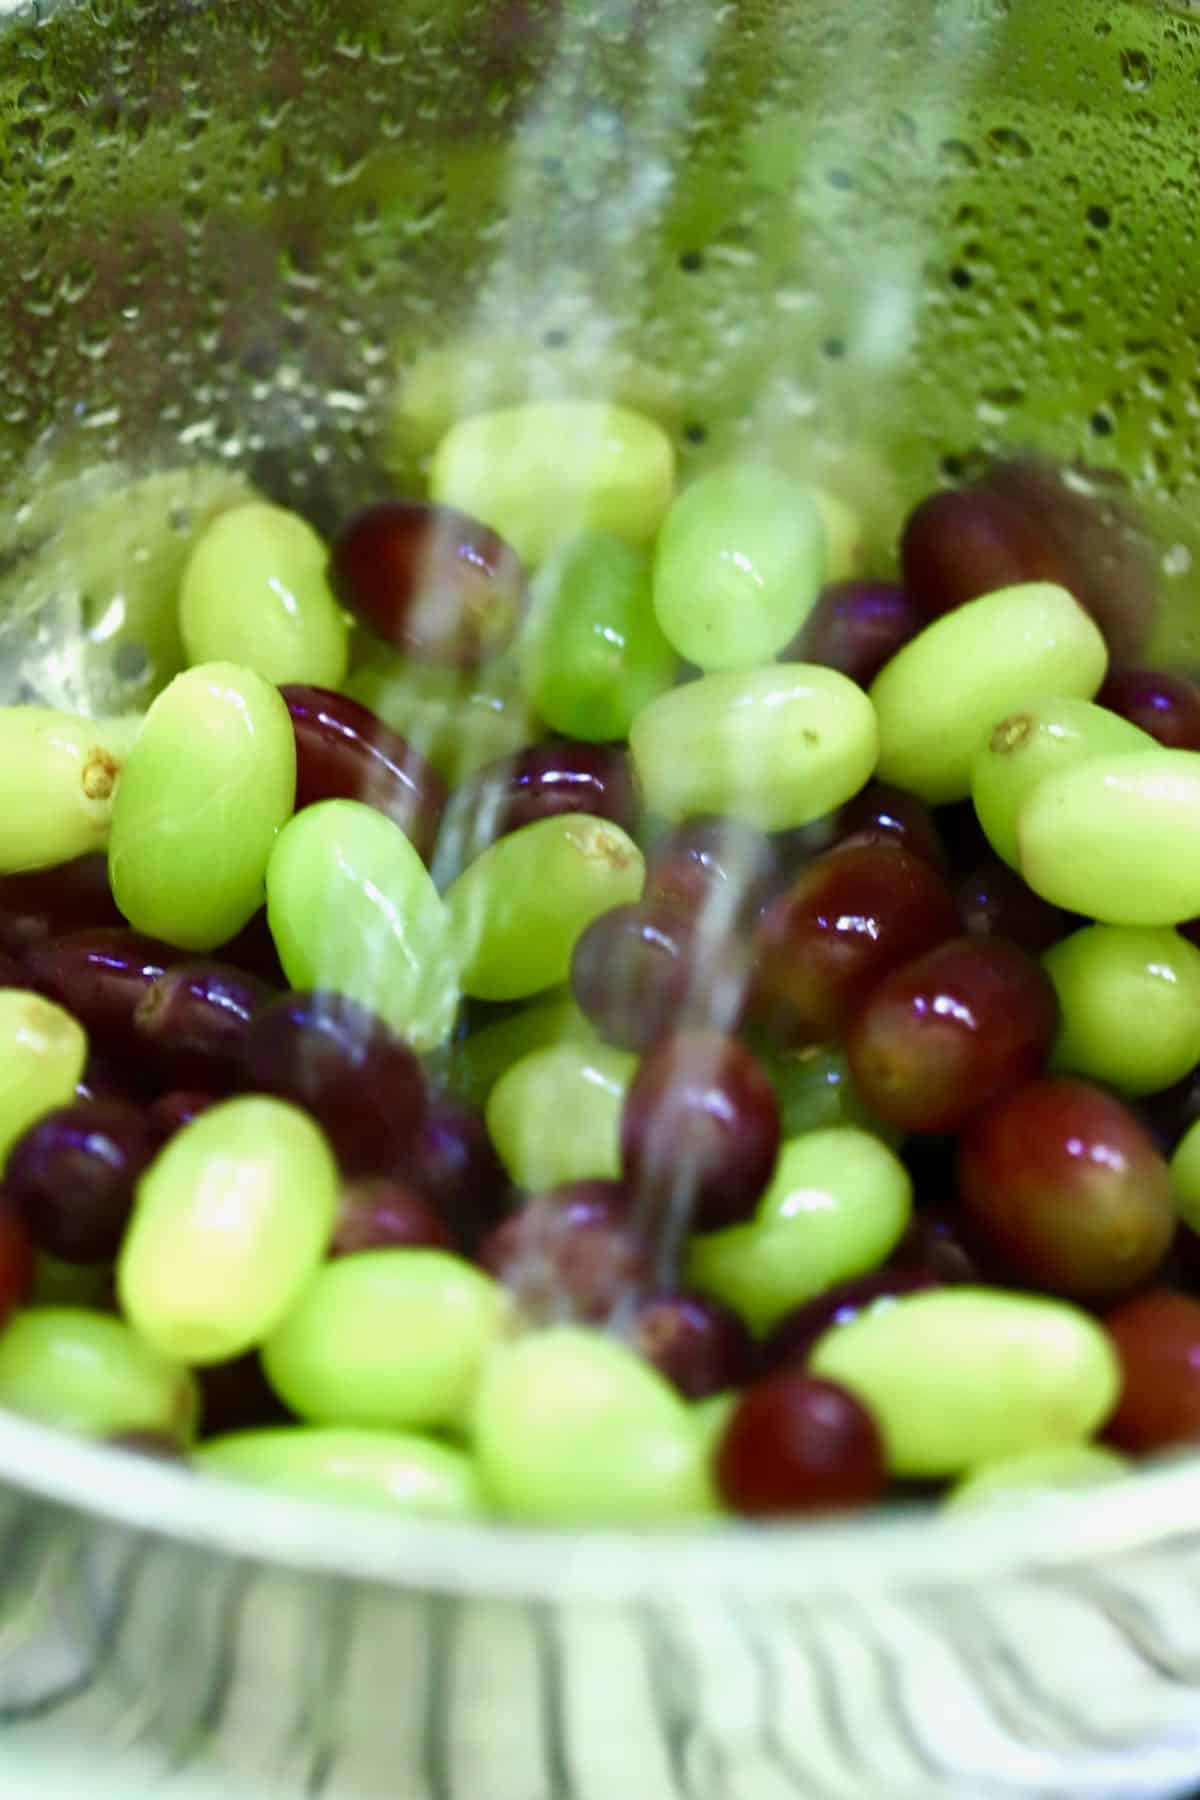 Grapes in a colander under running water in a sink.